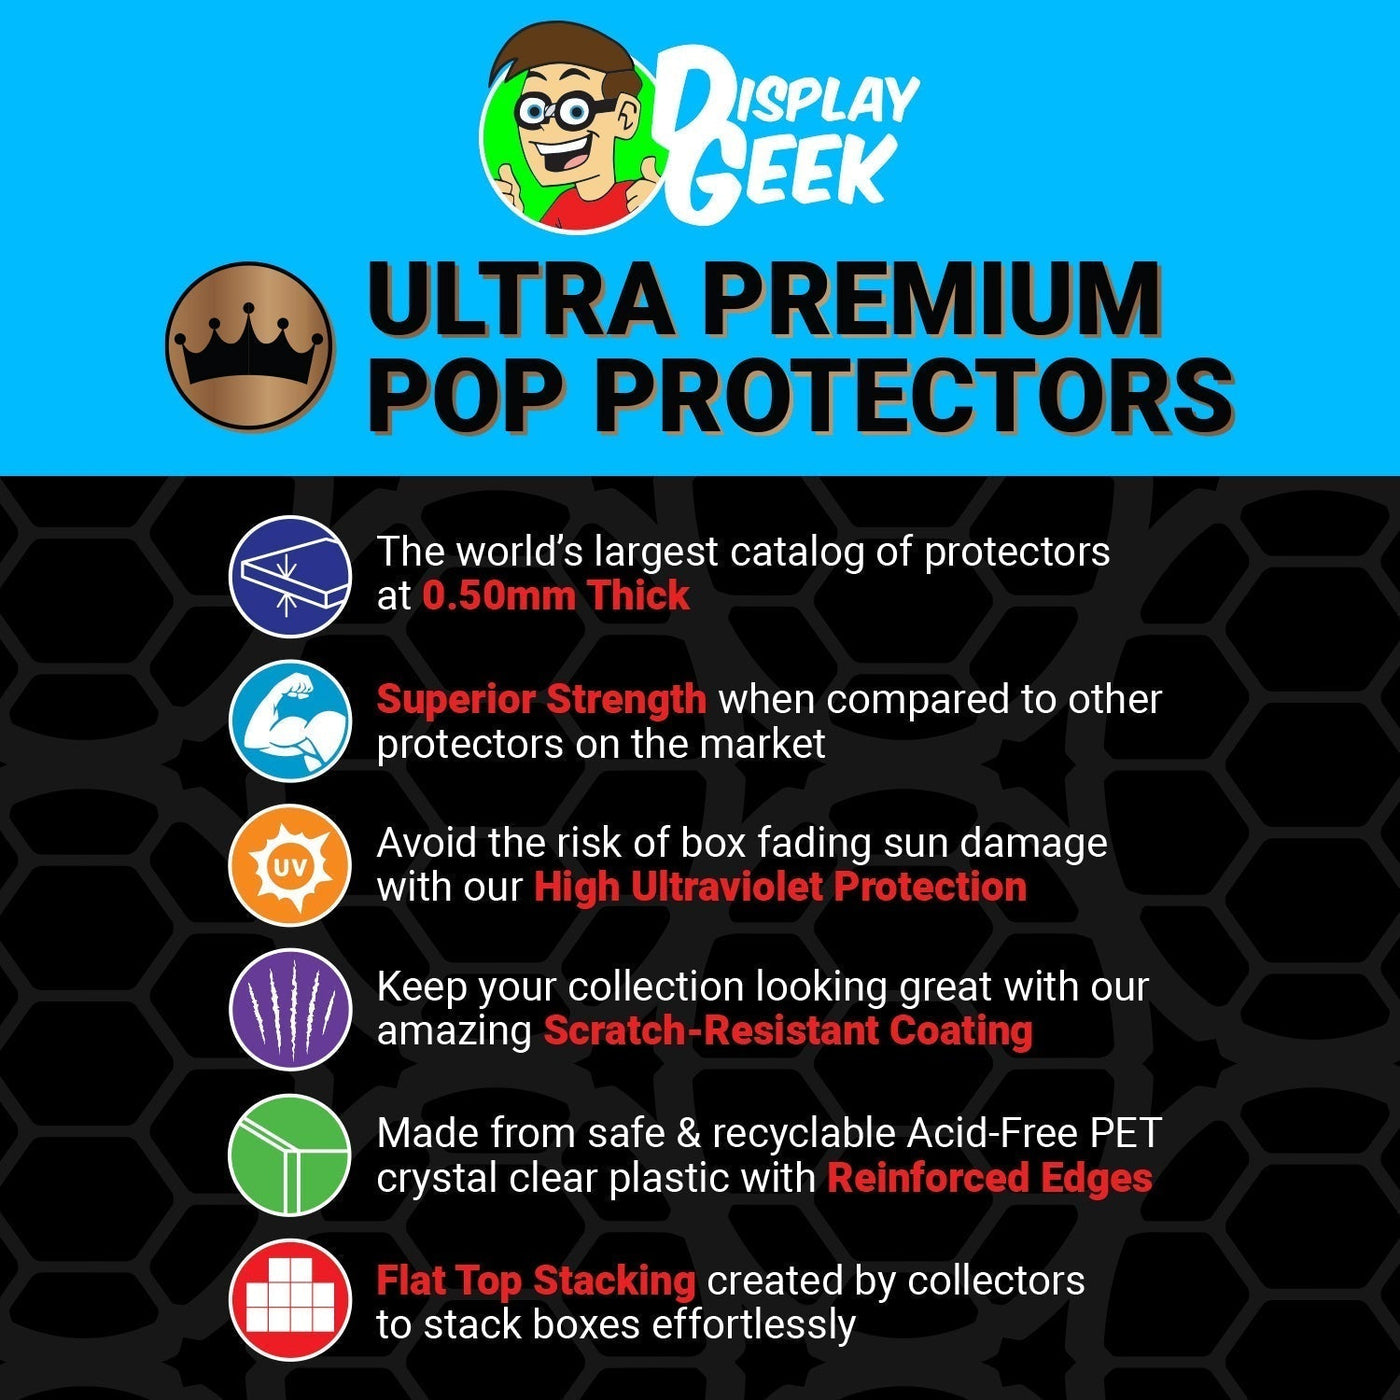 Pop Protector for Funkoverse Marvel 101 Chase Diamond Funko Expansion on The Protector Guide App by Display Geek